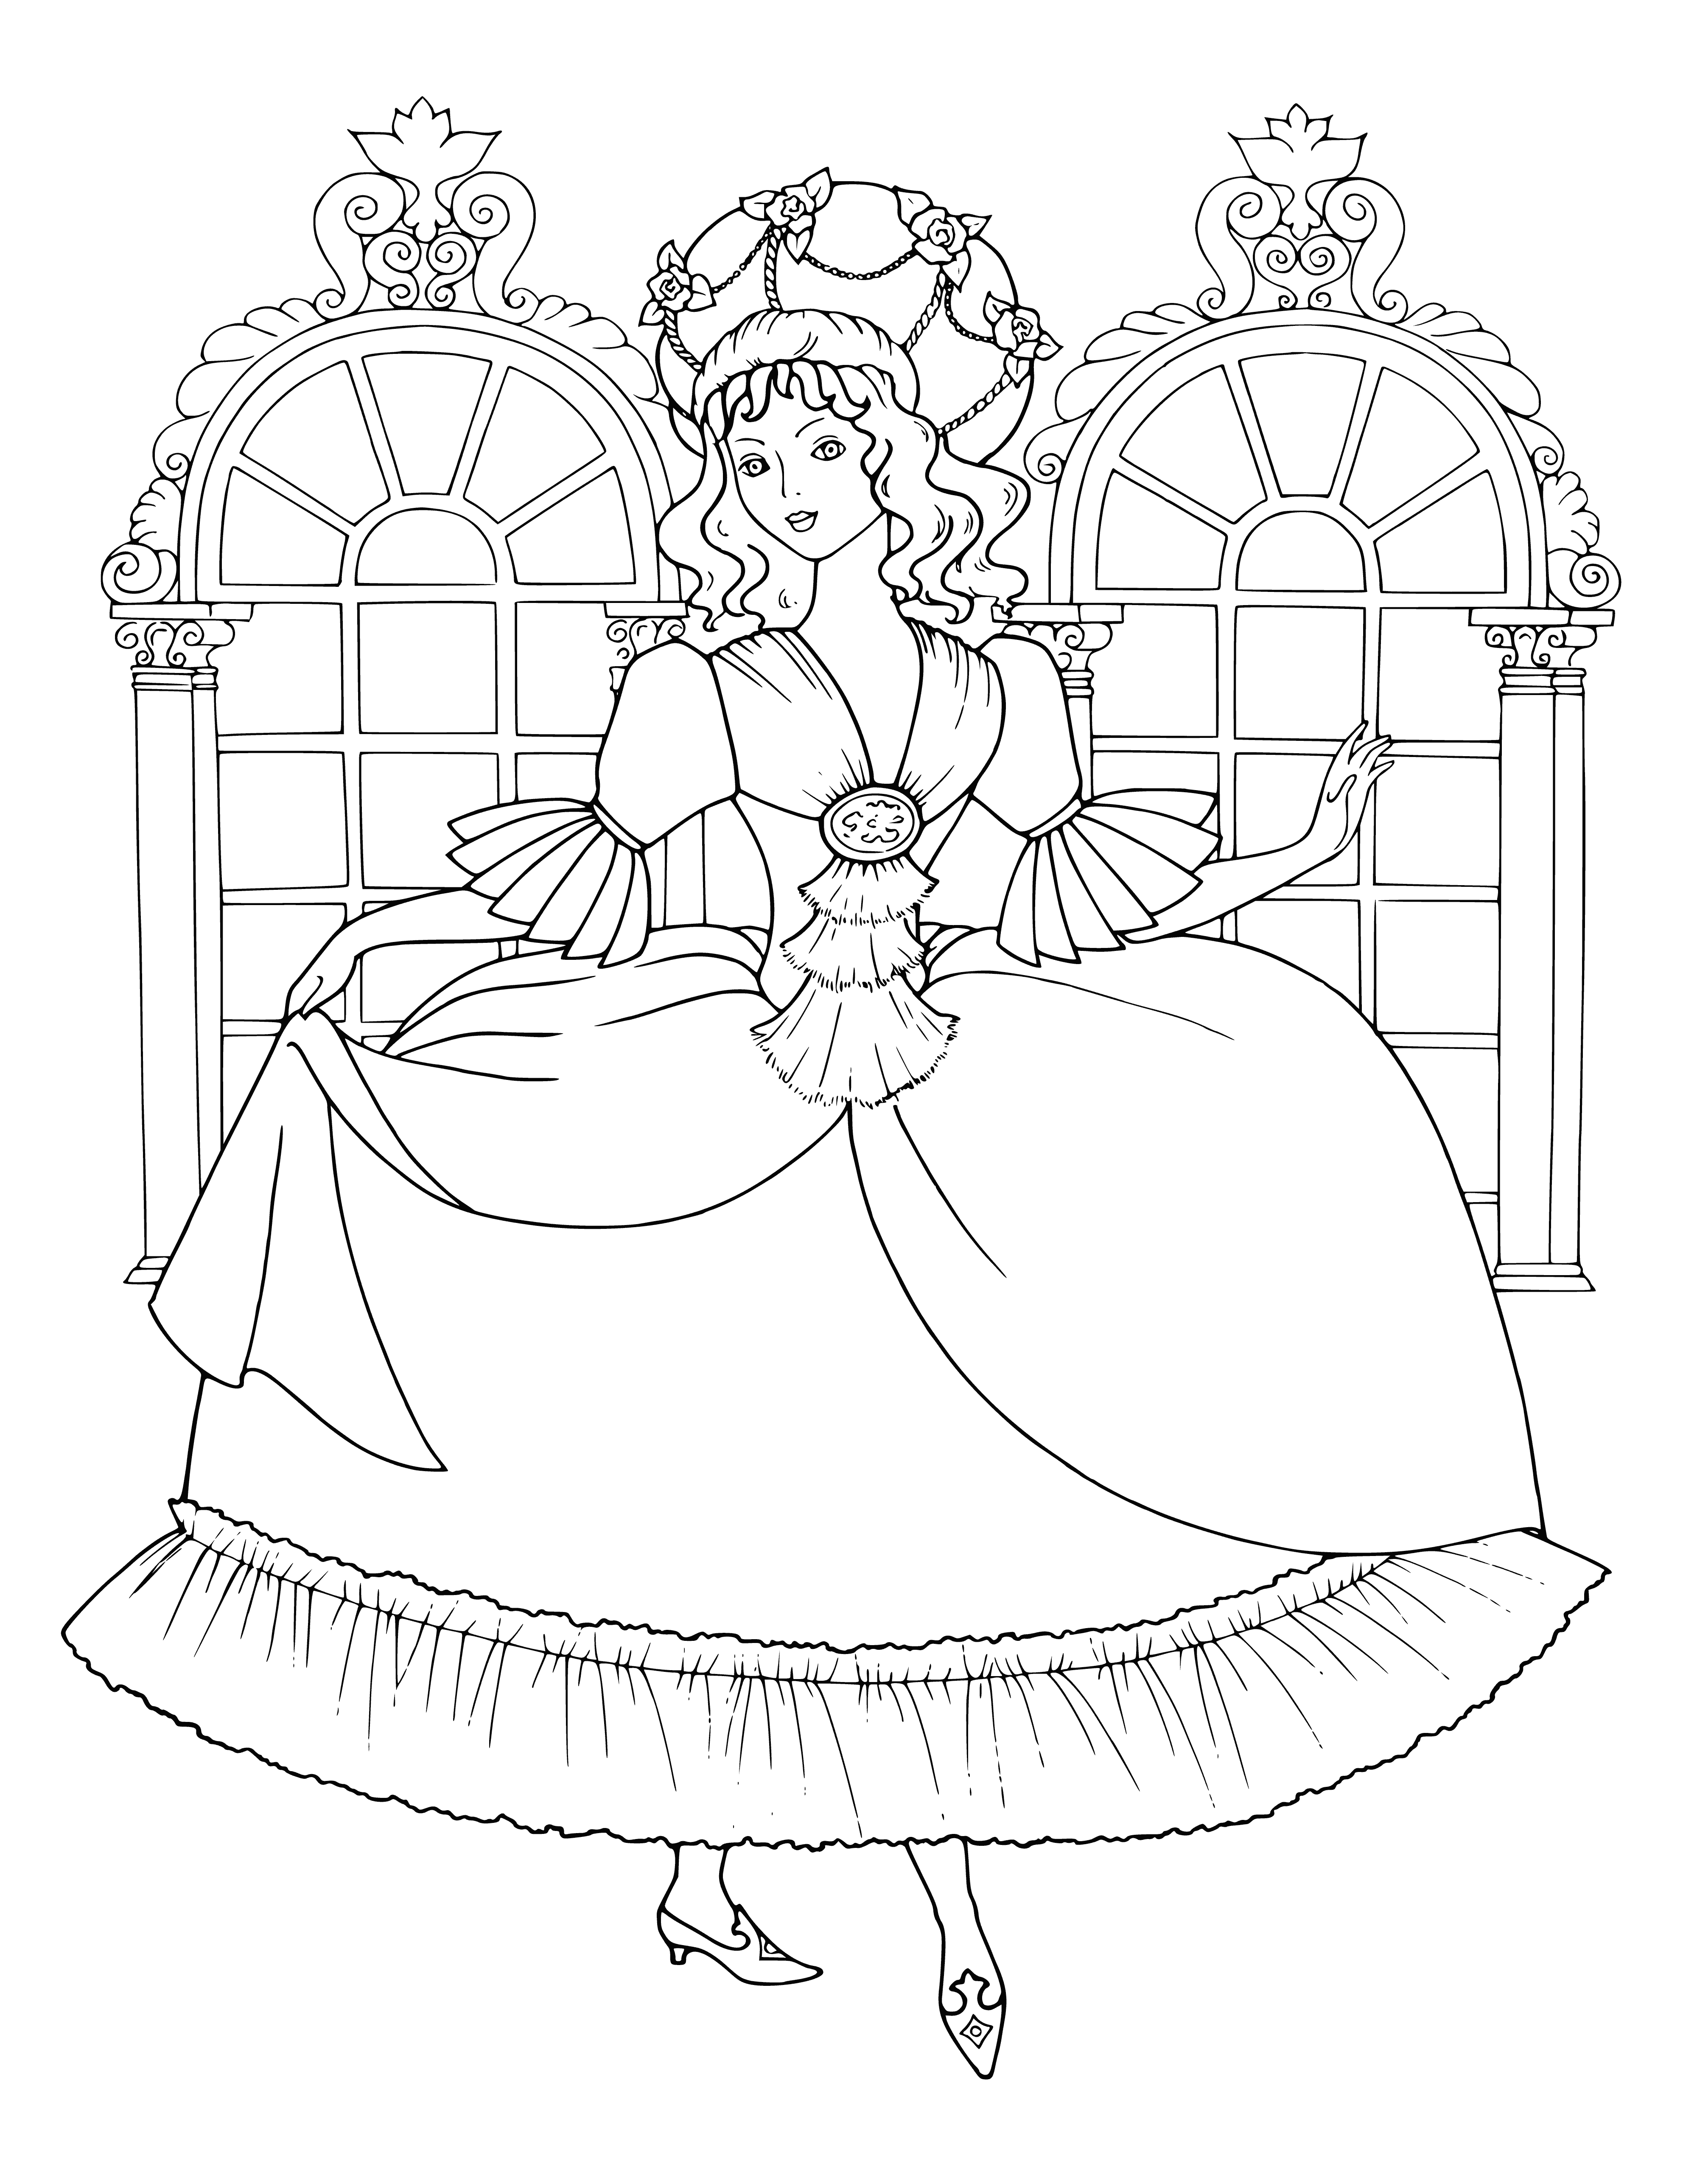 New shoes coloring page